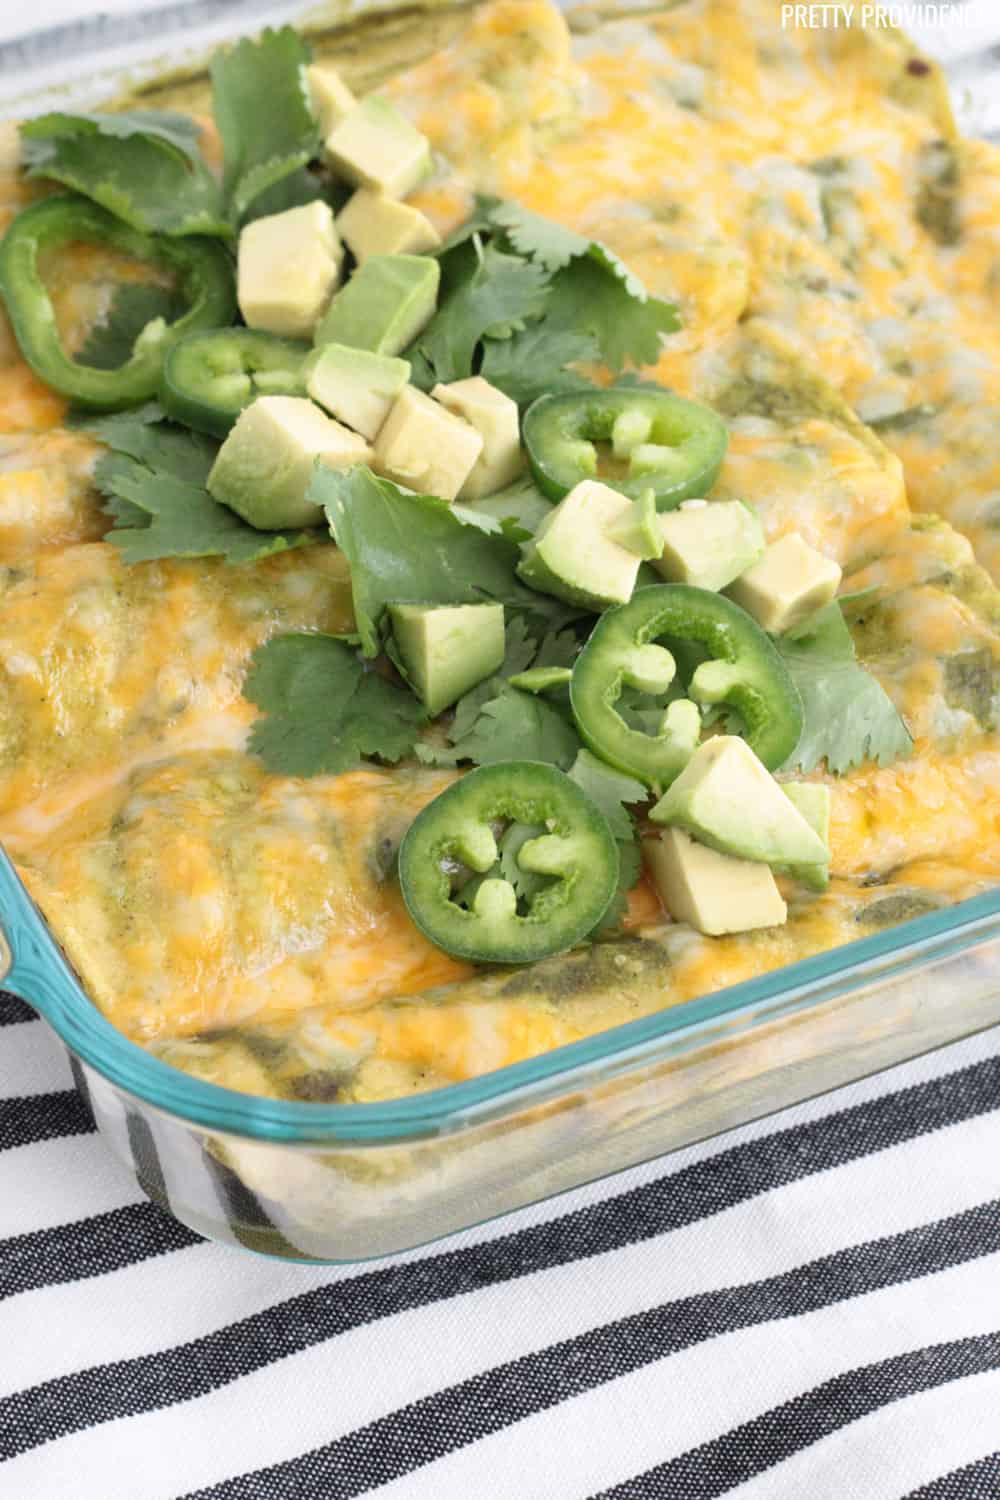 Green Beef Enchiladas in a glass dish, topped with cheese, jalapeños, avocado and cilantro.